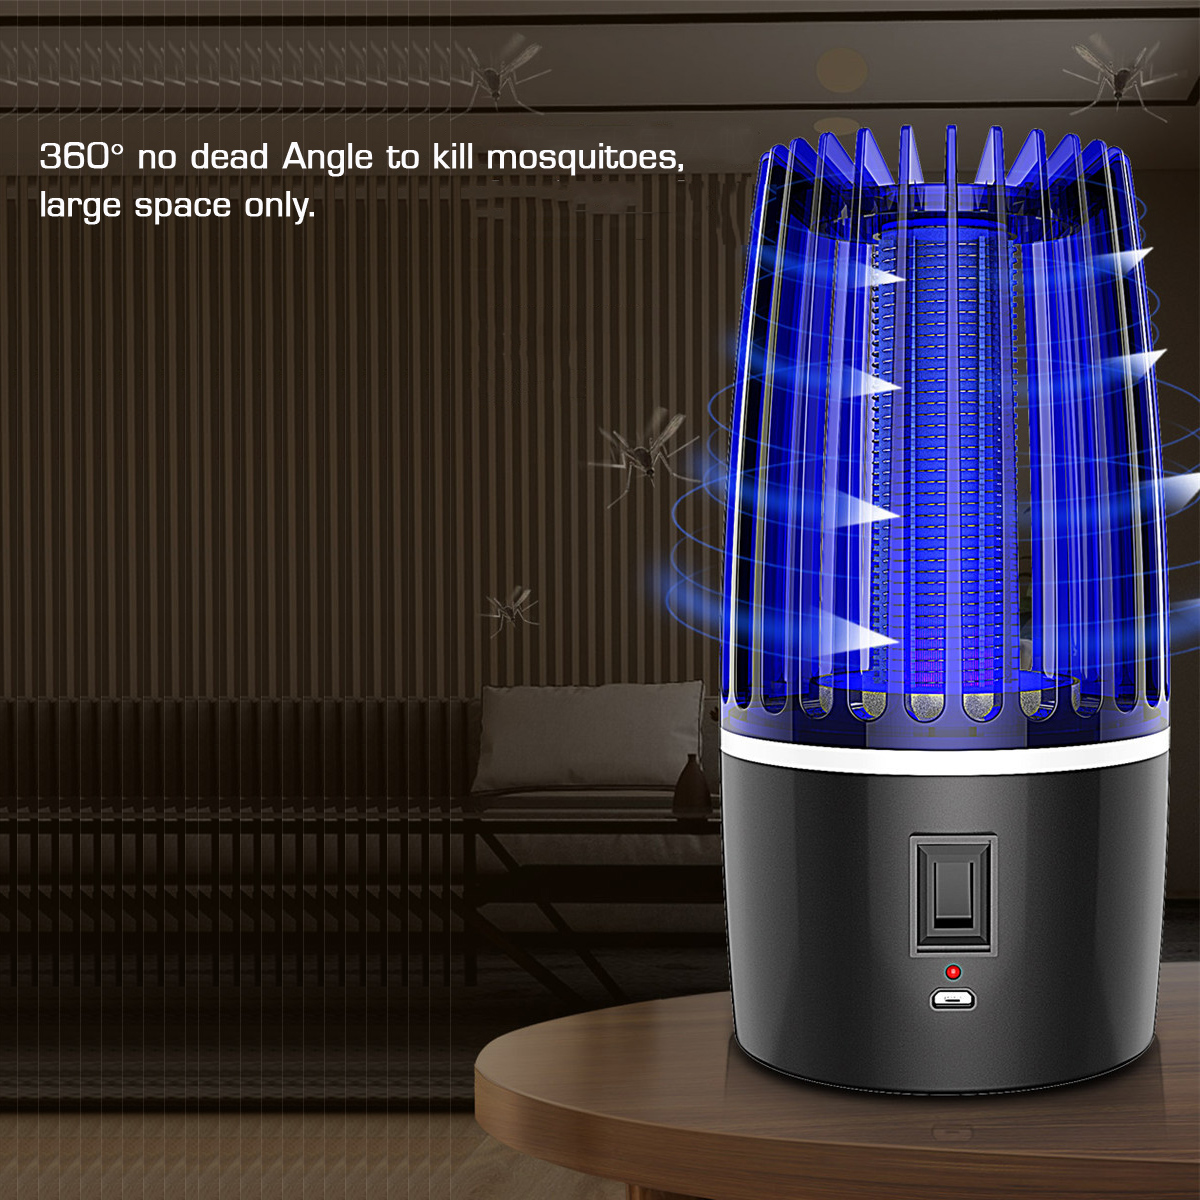 Rechargeable-5W-LED-Mosquito-Zapper-Killer-Fly-Insect-Bug-Trap-Lamp-Night-Light-DC5V-1668033-3